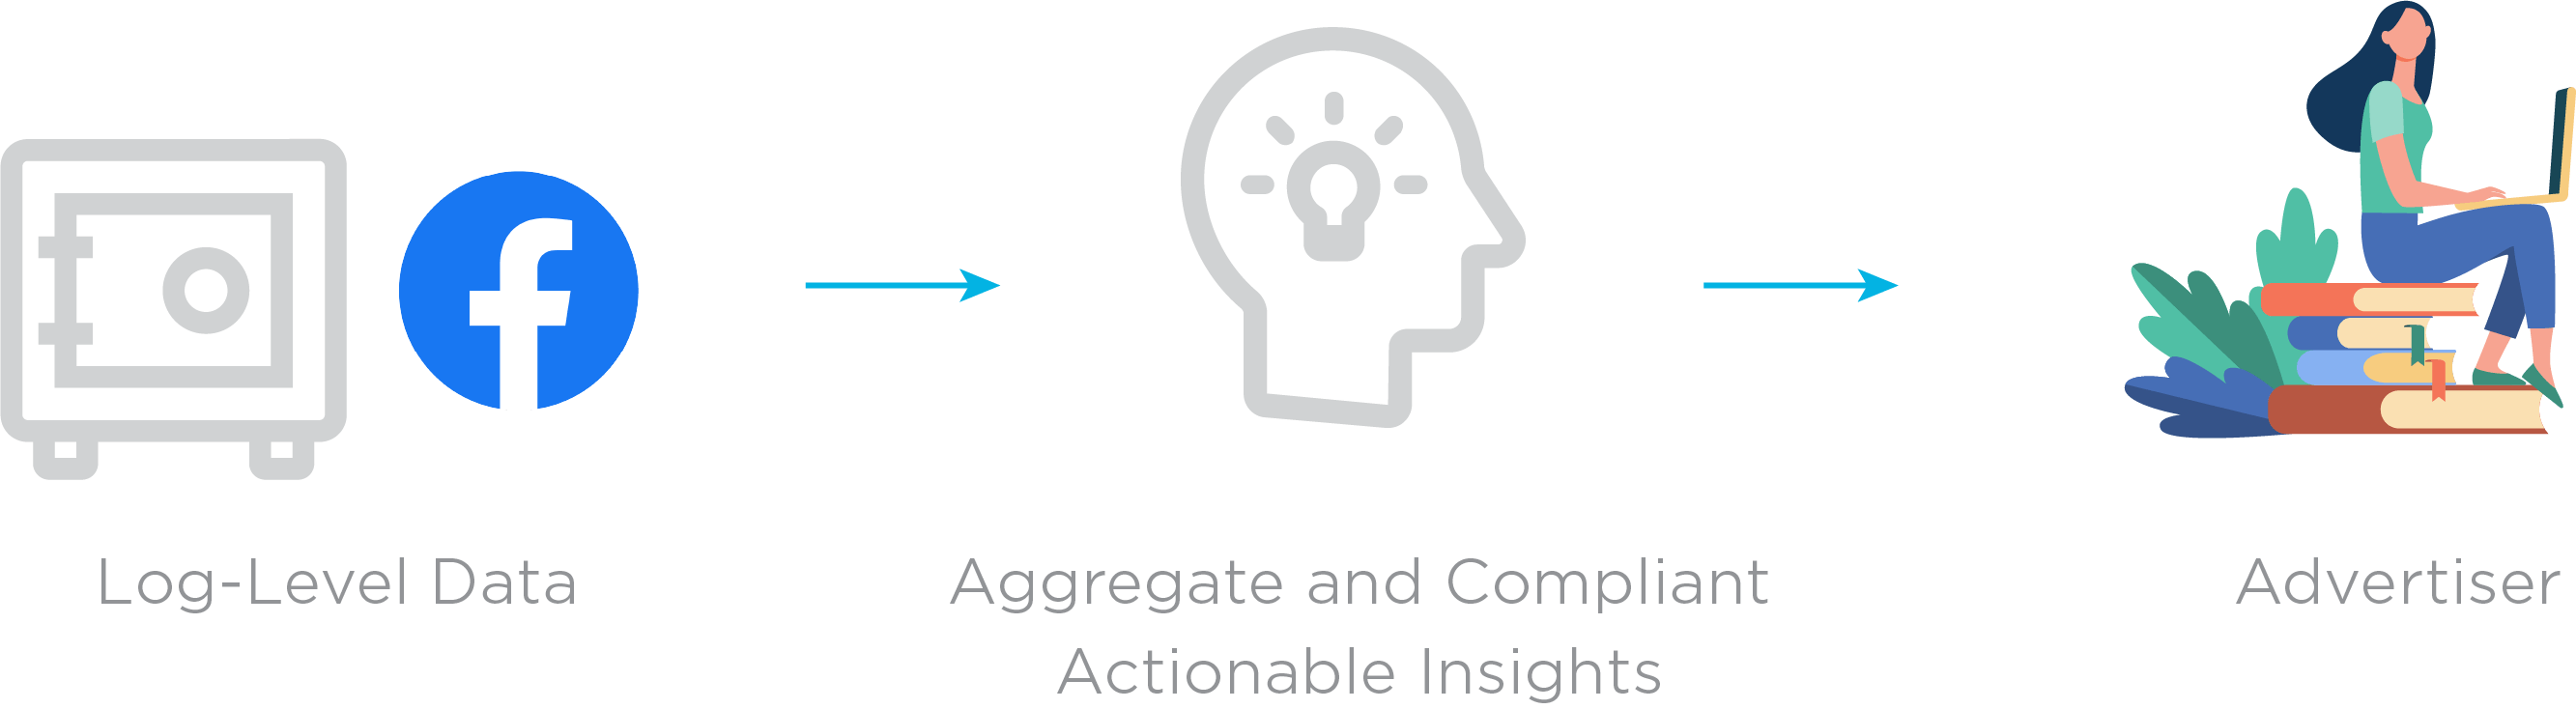 Aggregate and compliant actionable insights flow diagram